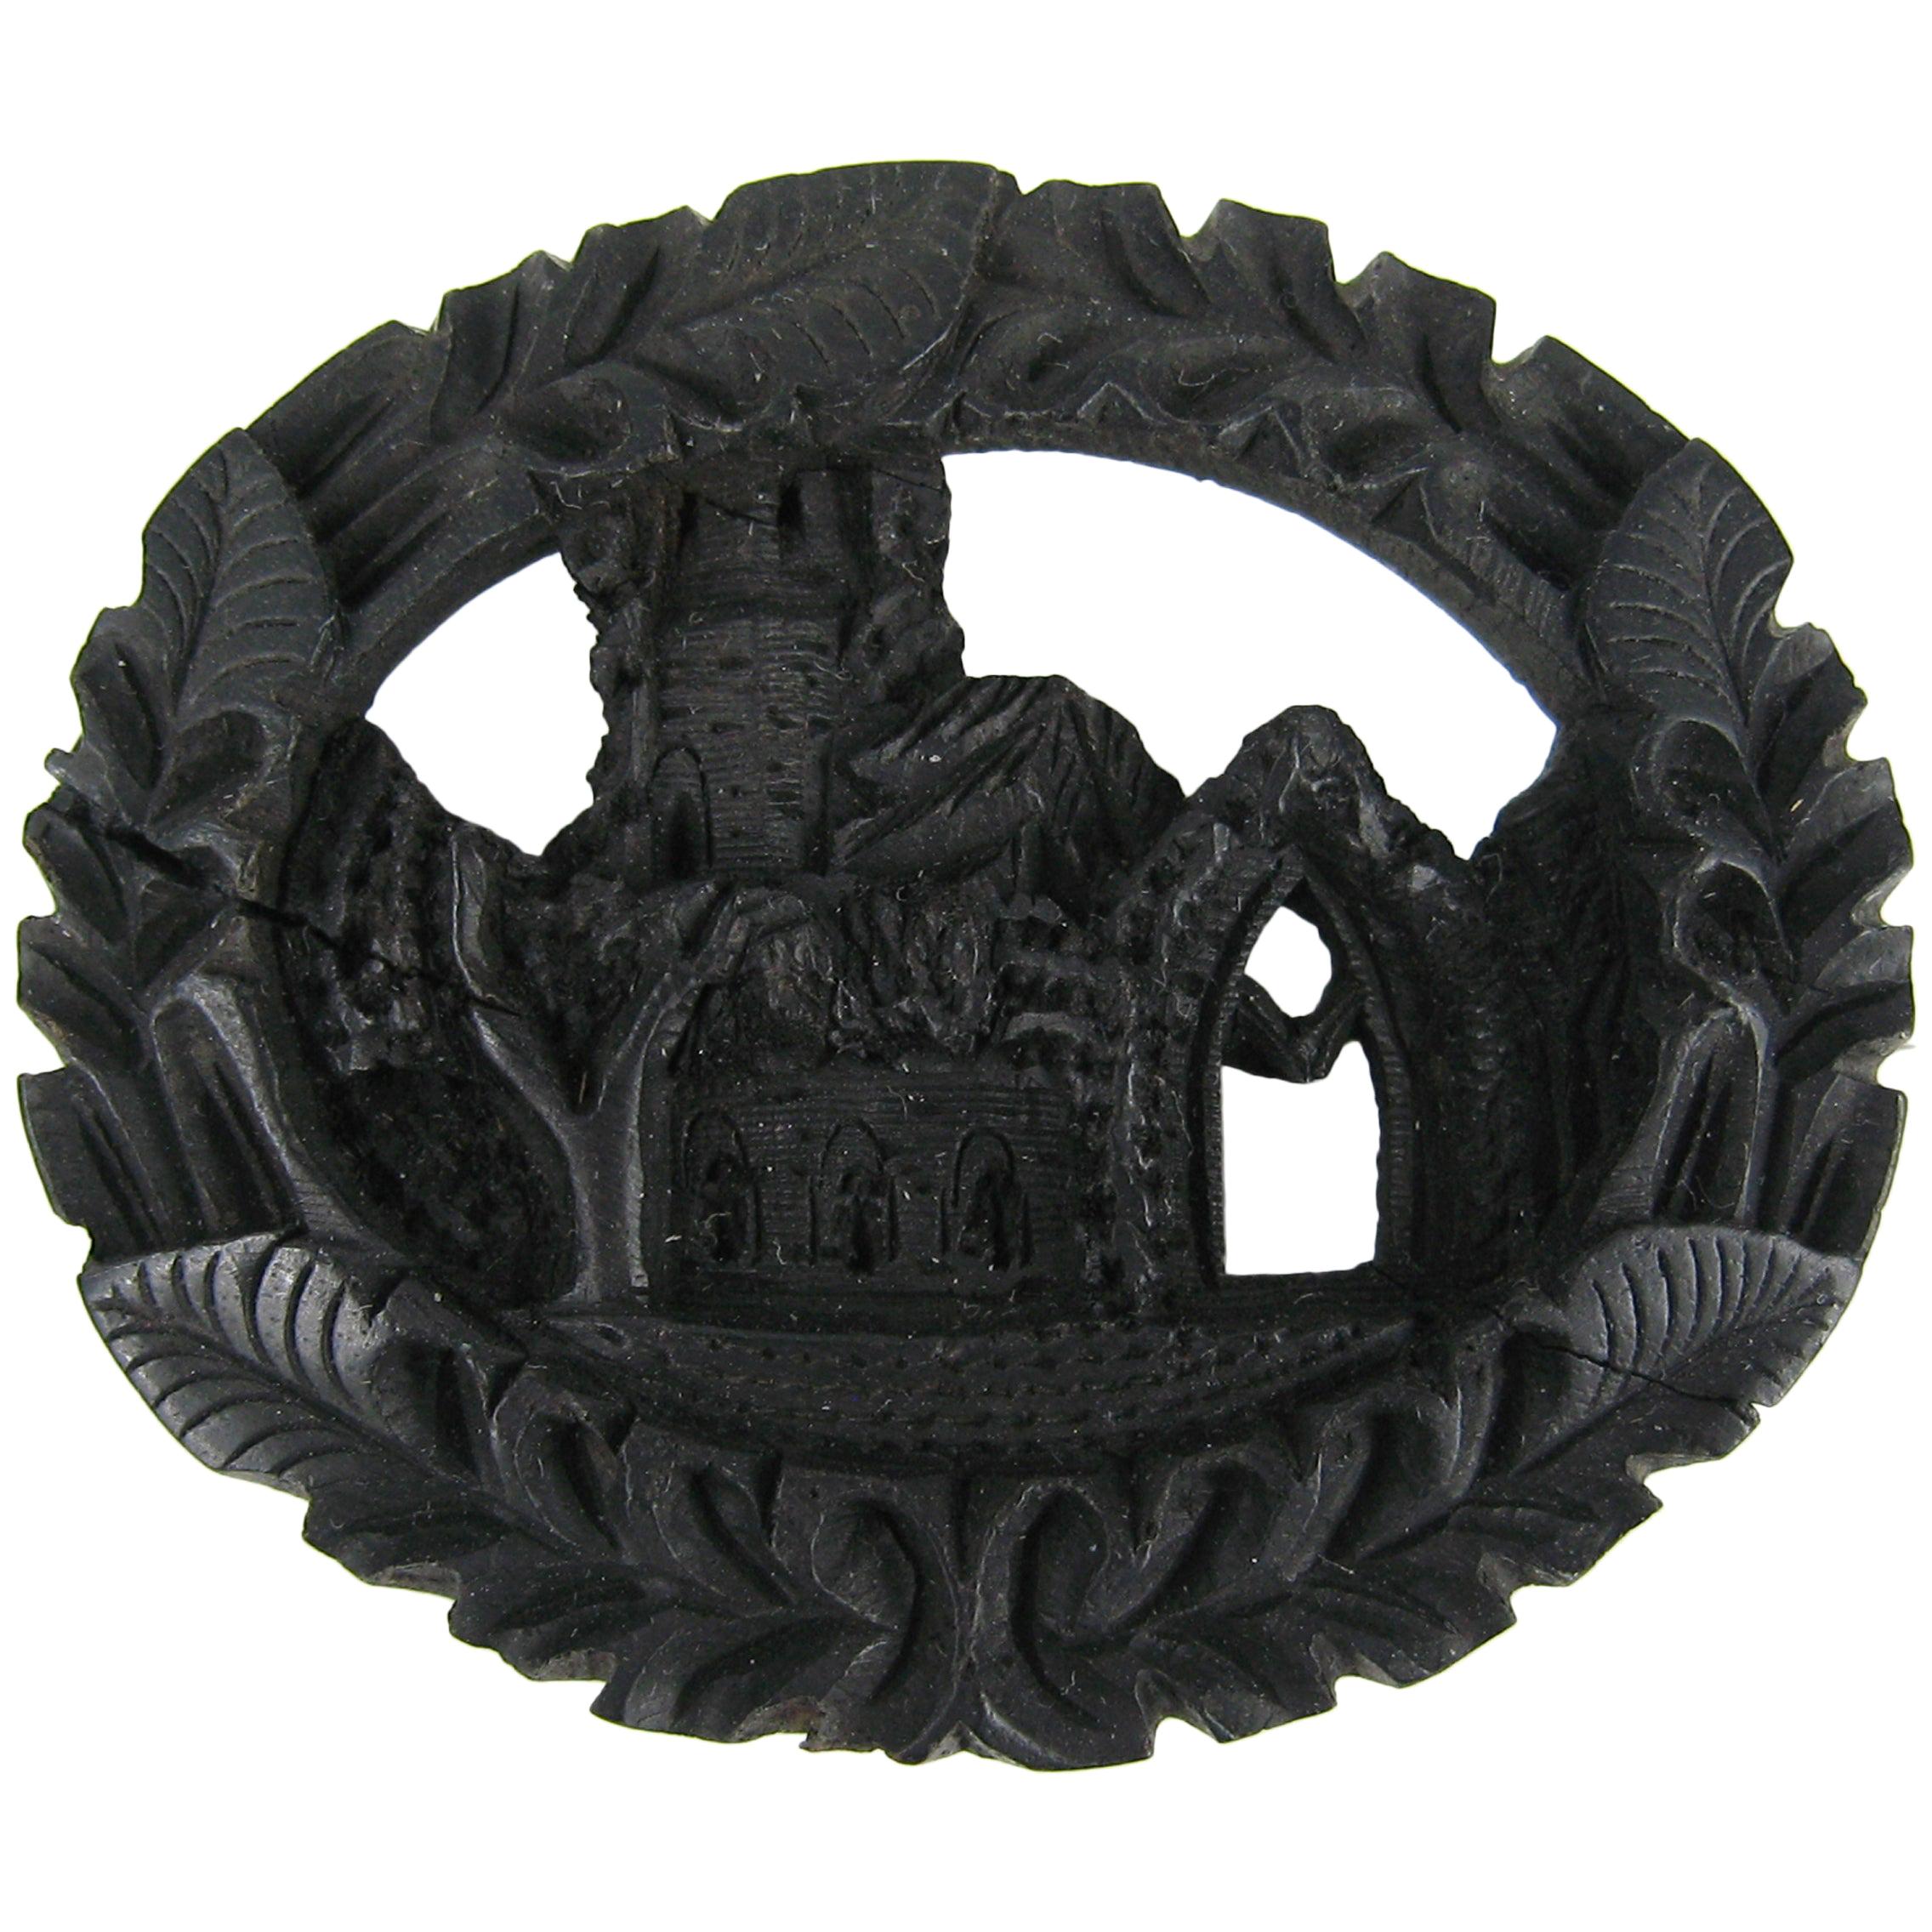 Victorian Whitby Jet Muckross House Mourning Brooch Pin 